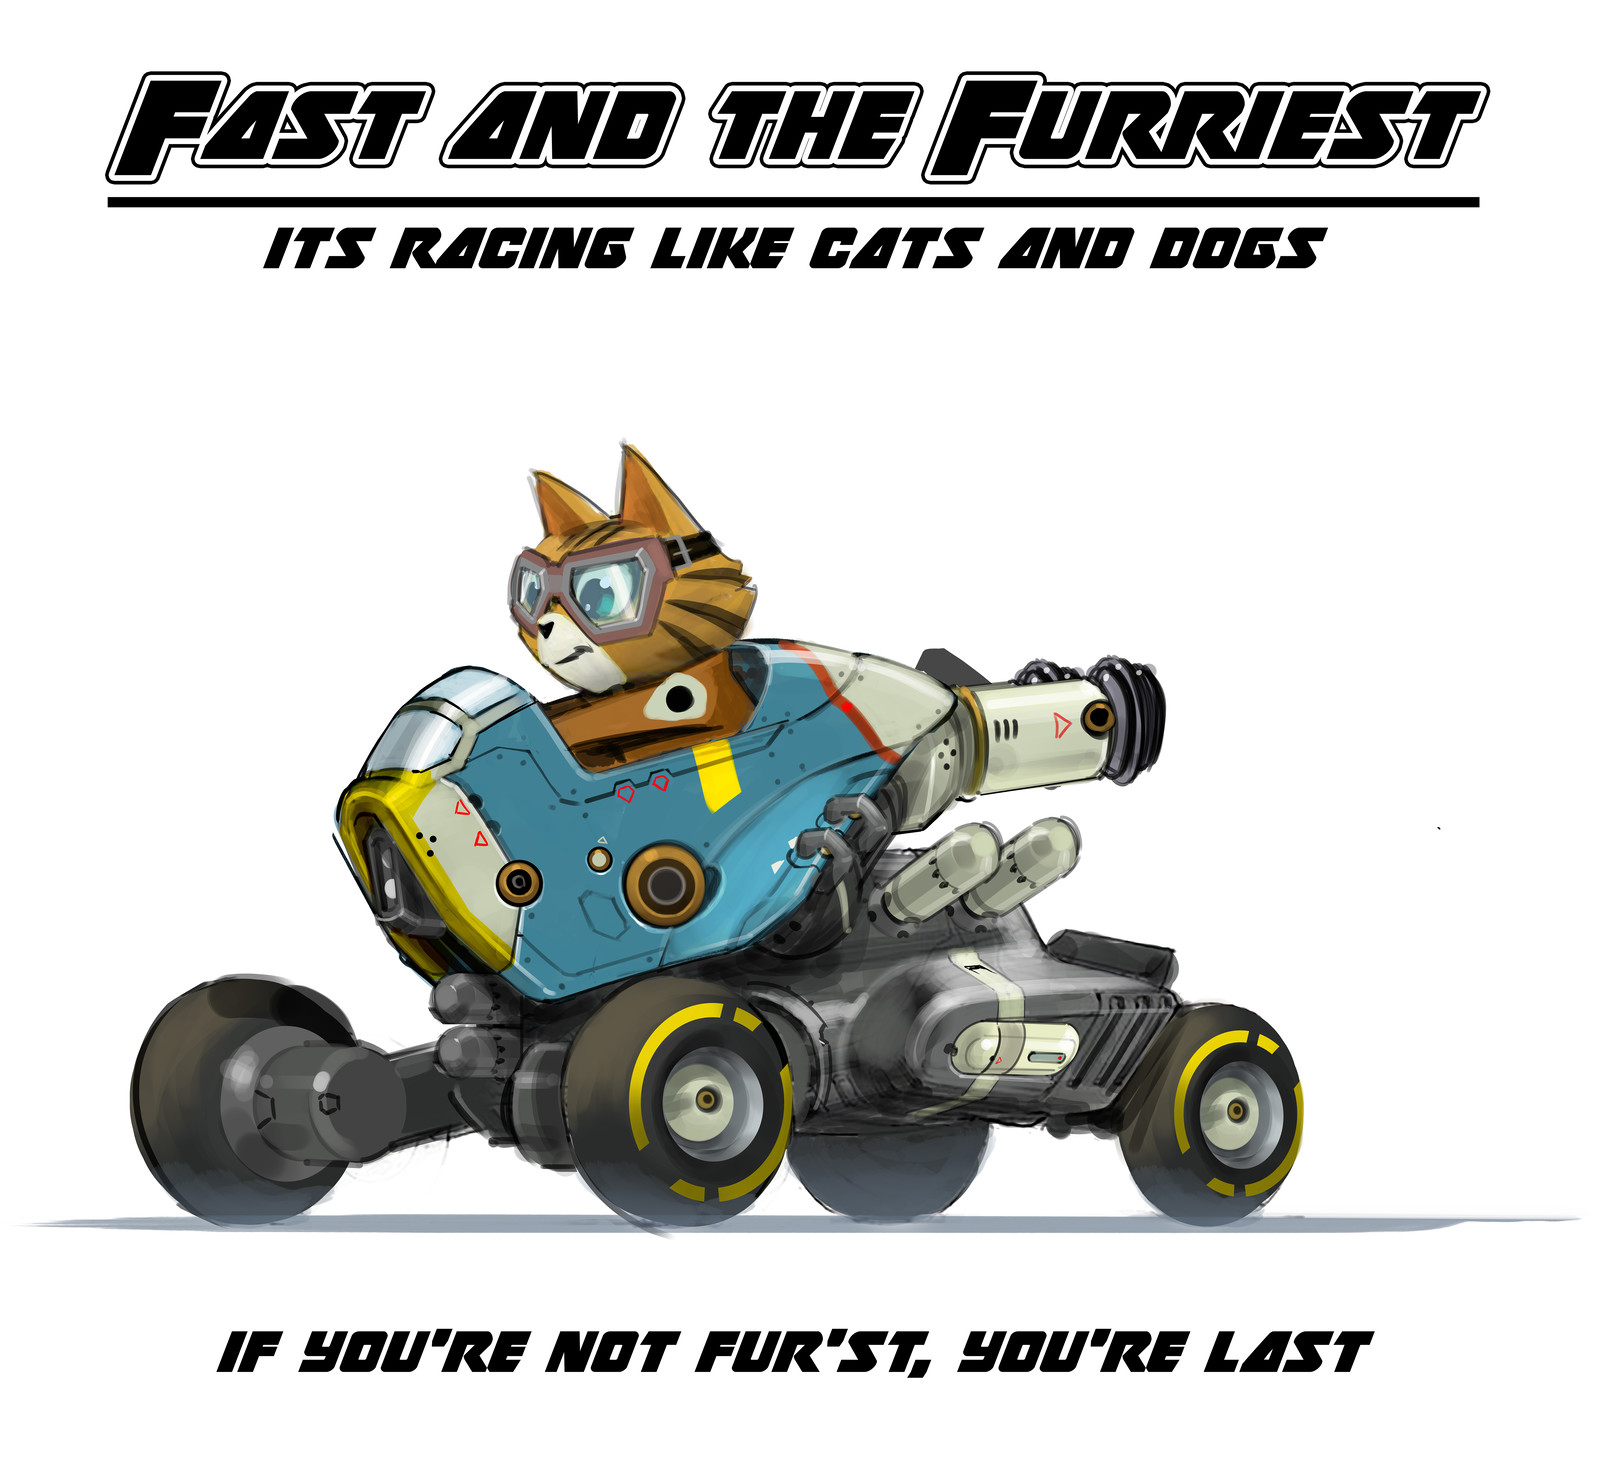 The tail of the cats and dogs kart racing league